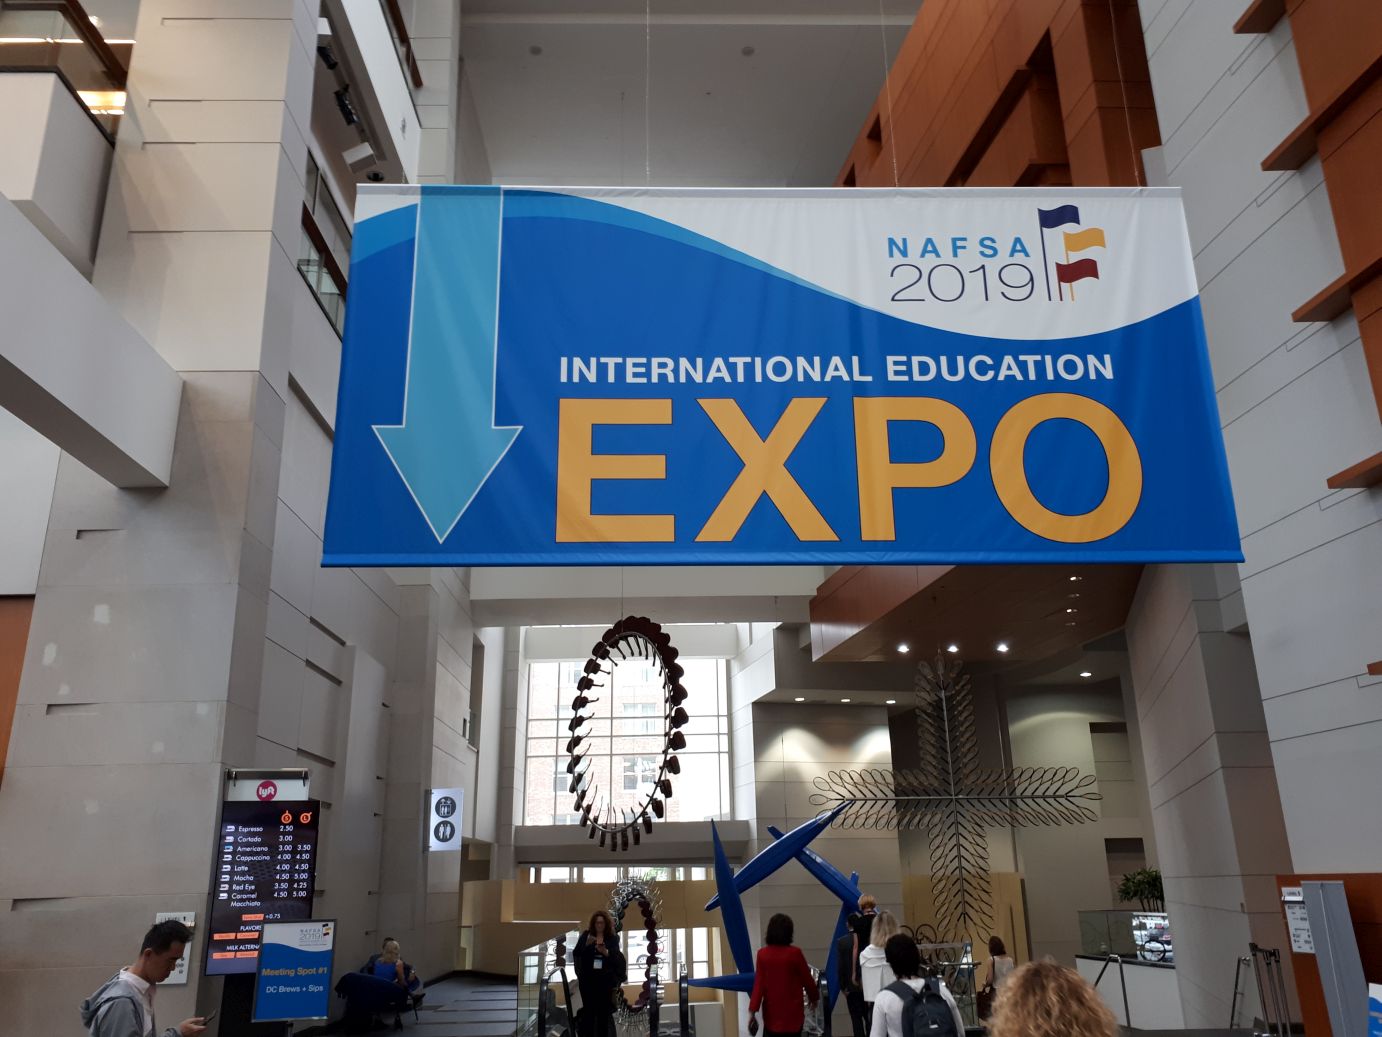 Image of the entrance of the expo in Washington